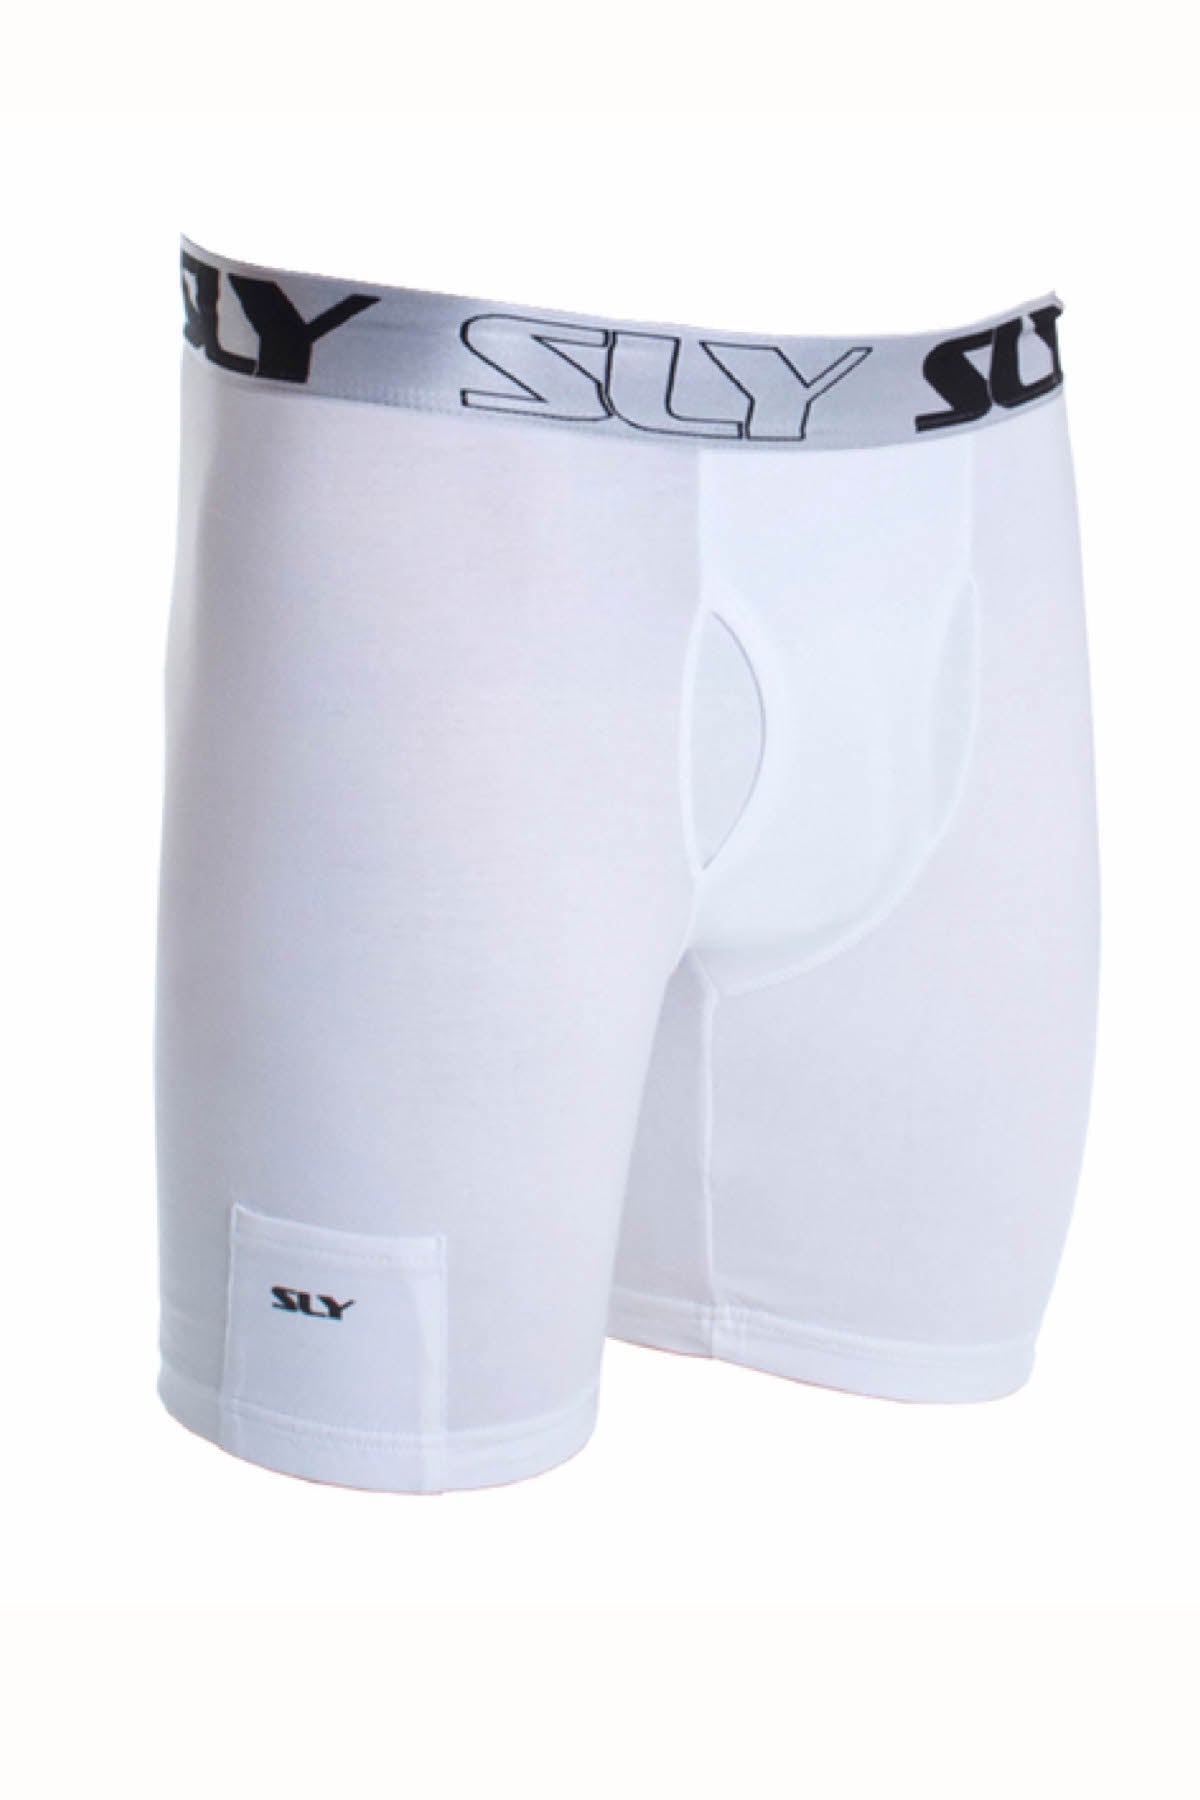 Sly White Solid Boxer Brief - Long